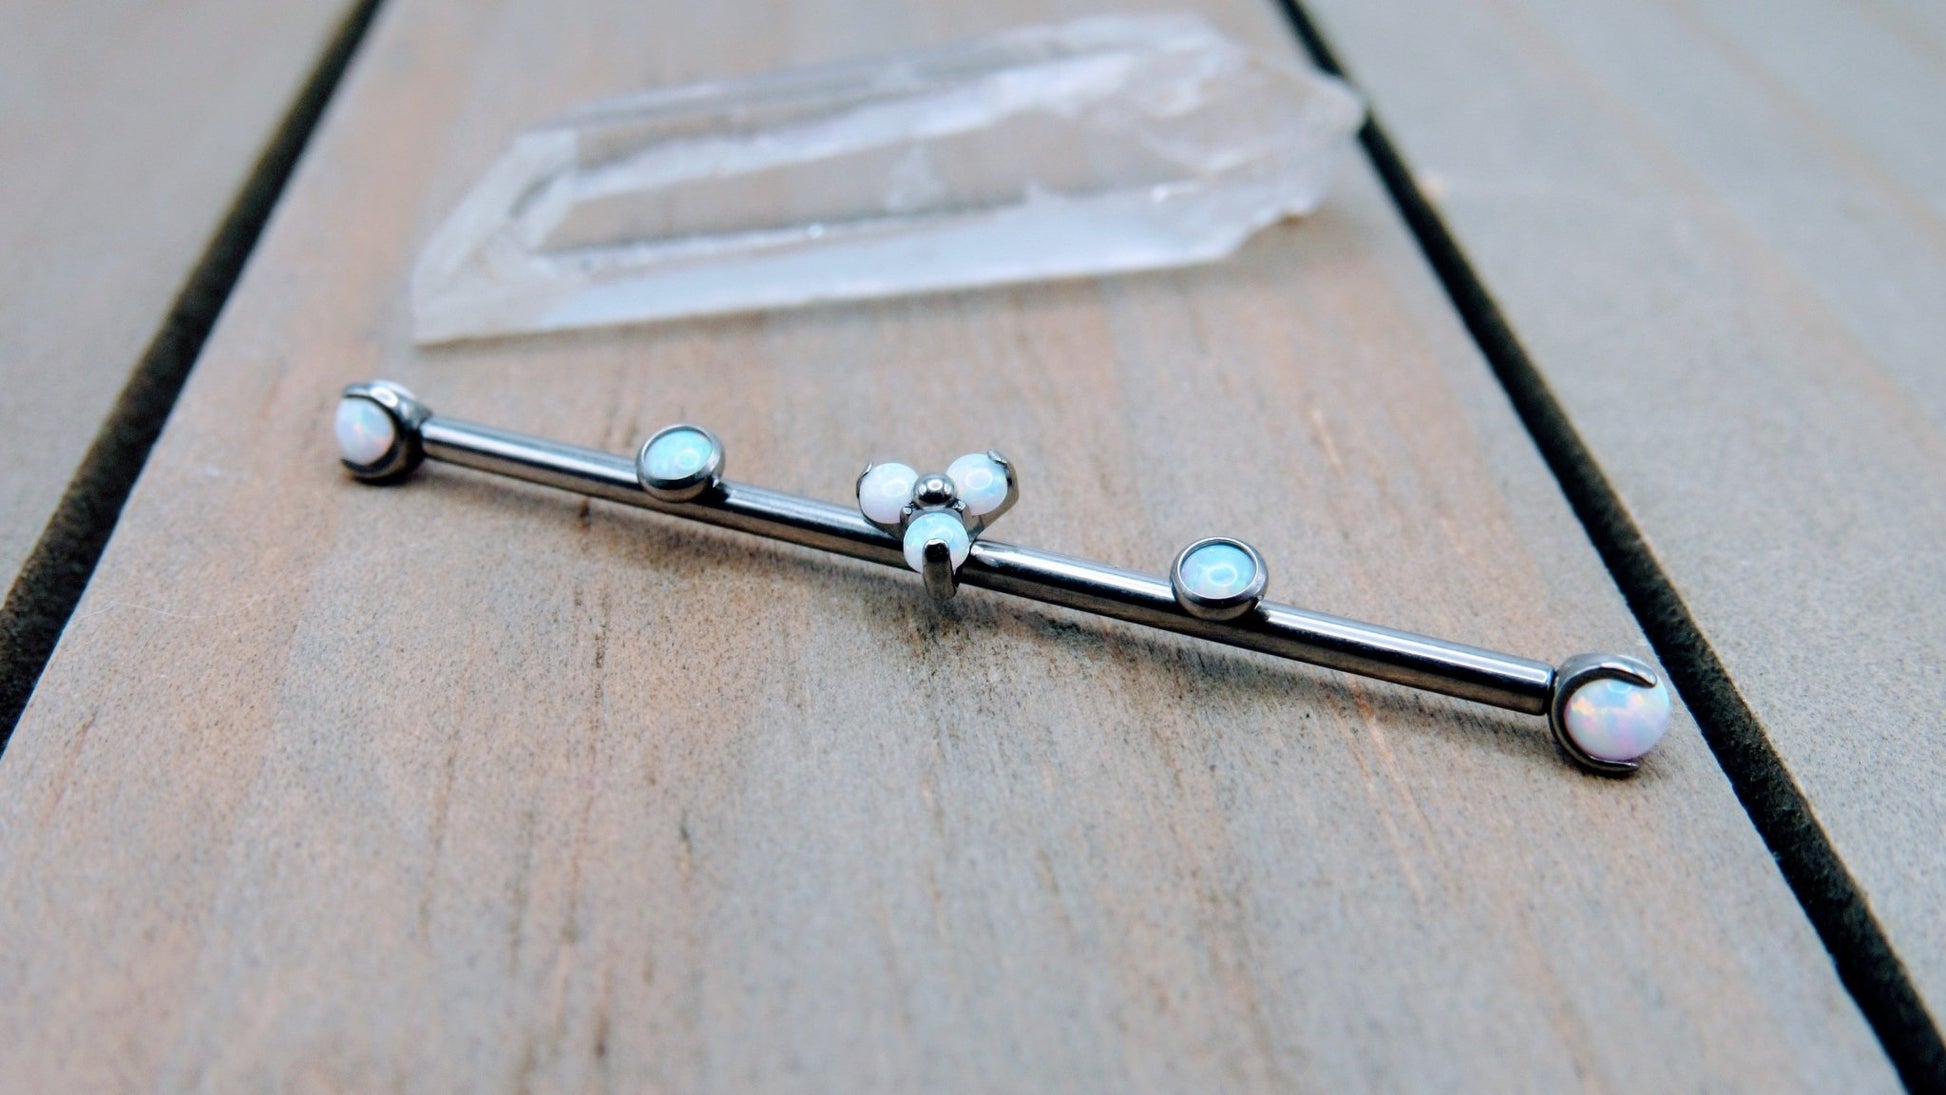 Titanium opal industrial piercing barbell custom made 14g pick your length white opals scaffold piercings jewelry - Siren Body Jewelry